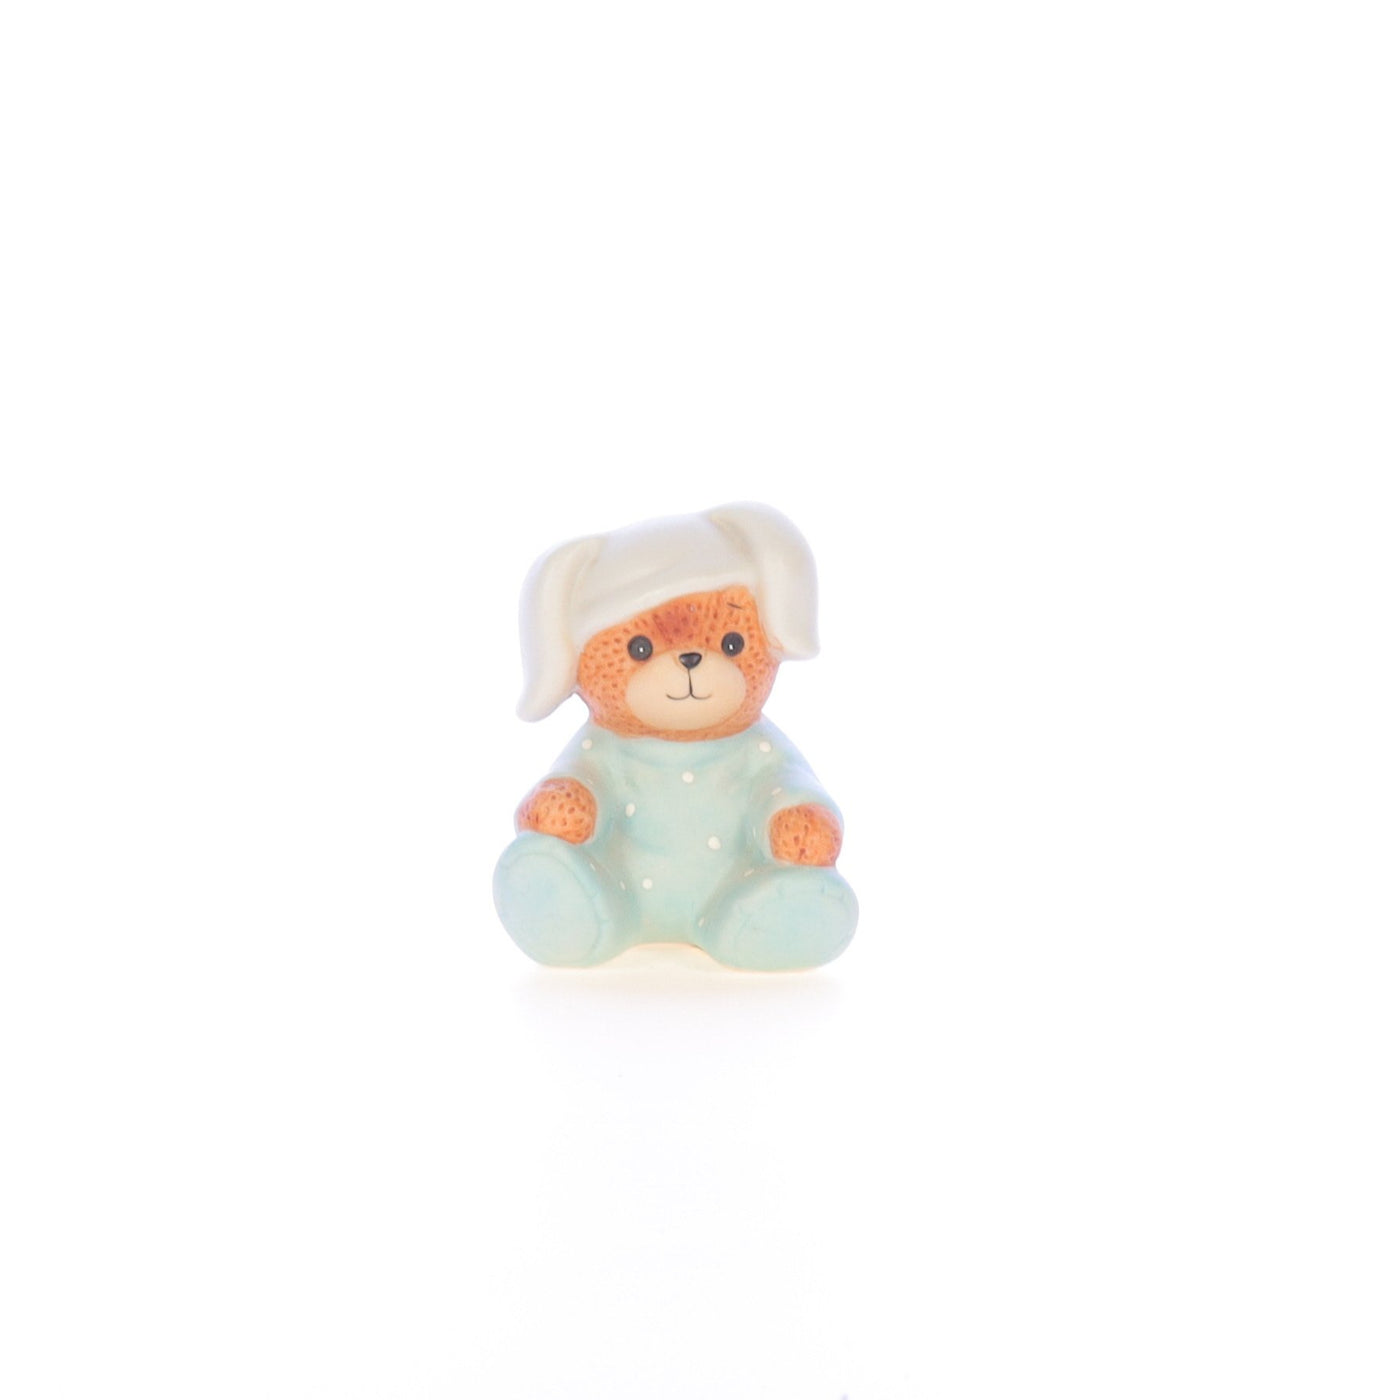 Lucy_And_Me_by_Lucy_Atwell_Porcelain_Figurine_Bear_with_Rabbit_Night_Cap_Lucy_Unknown_035_01